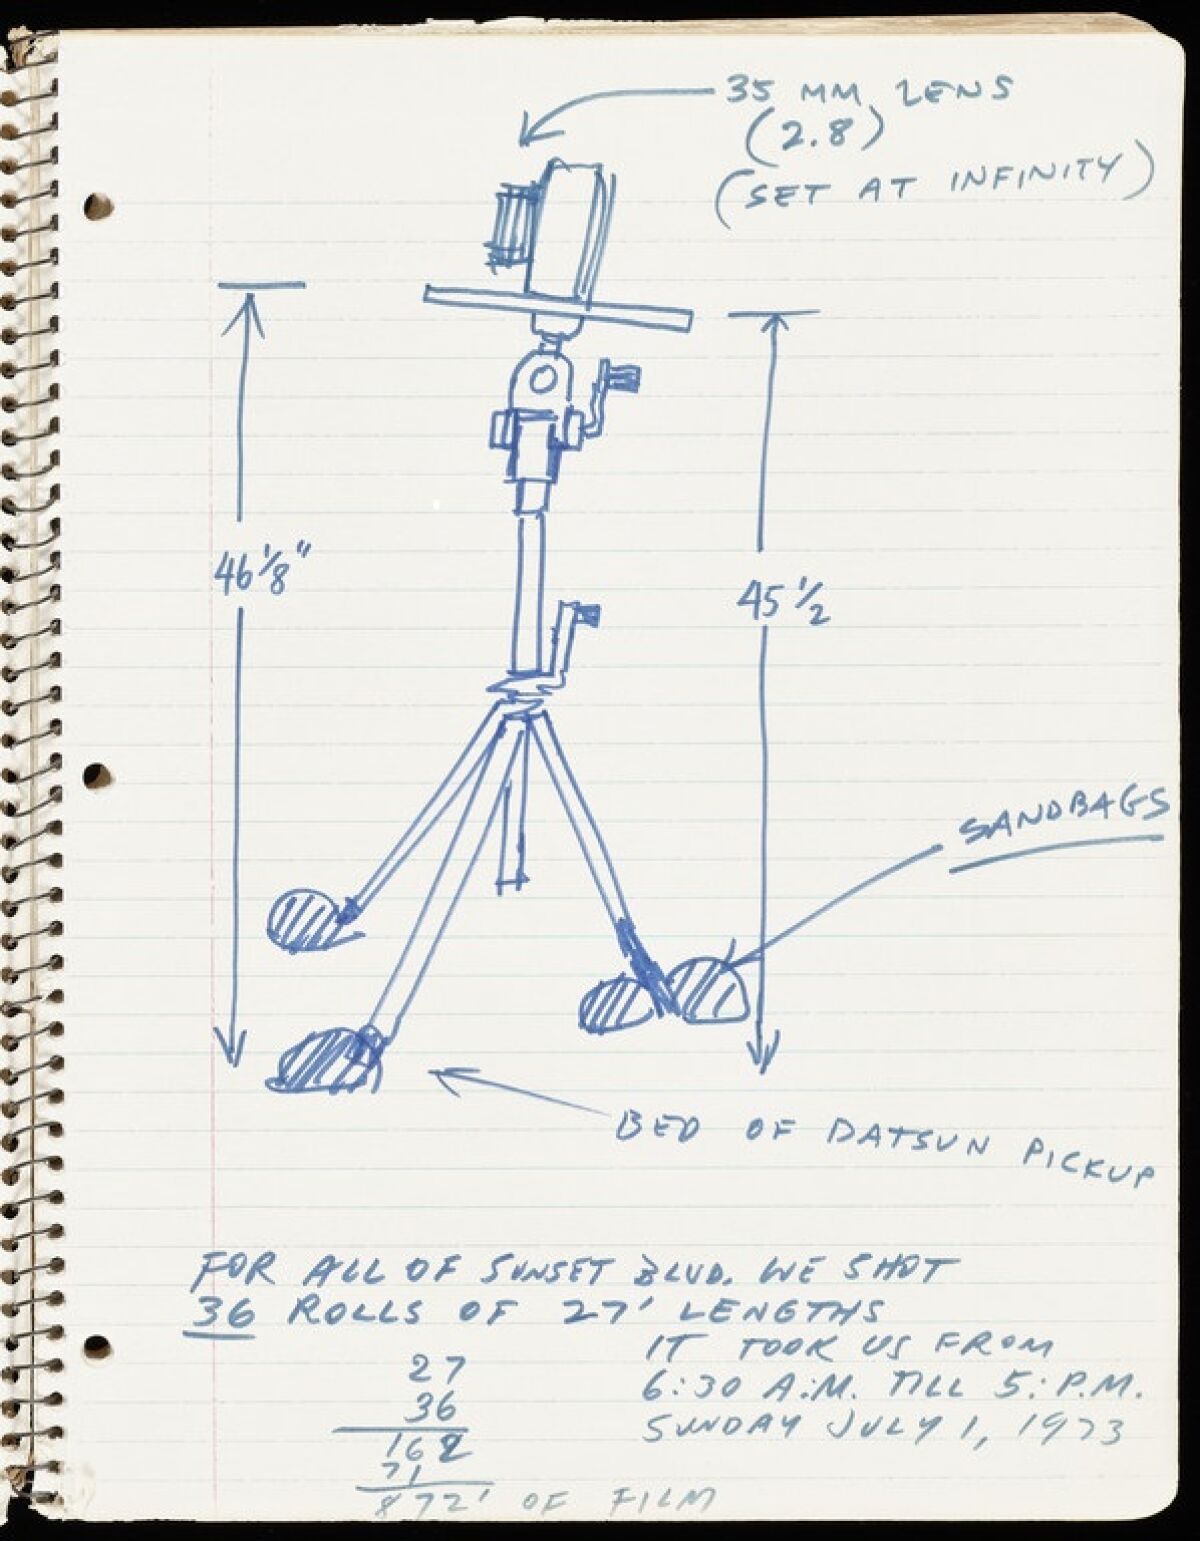 Ed Ruscha’s camera diagram from the “Streets of Los Angeles” archive.